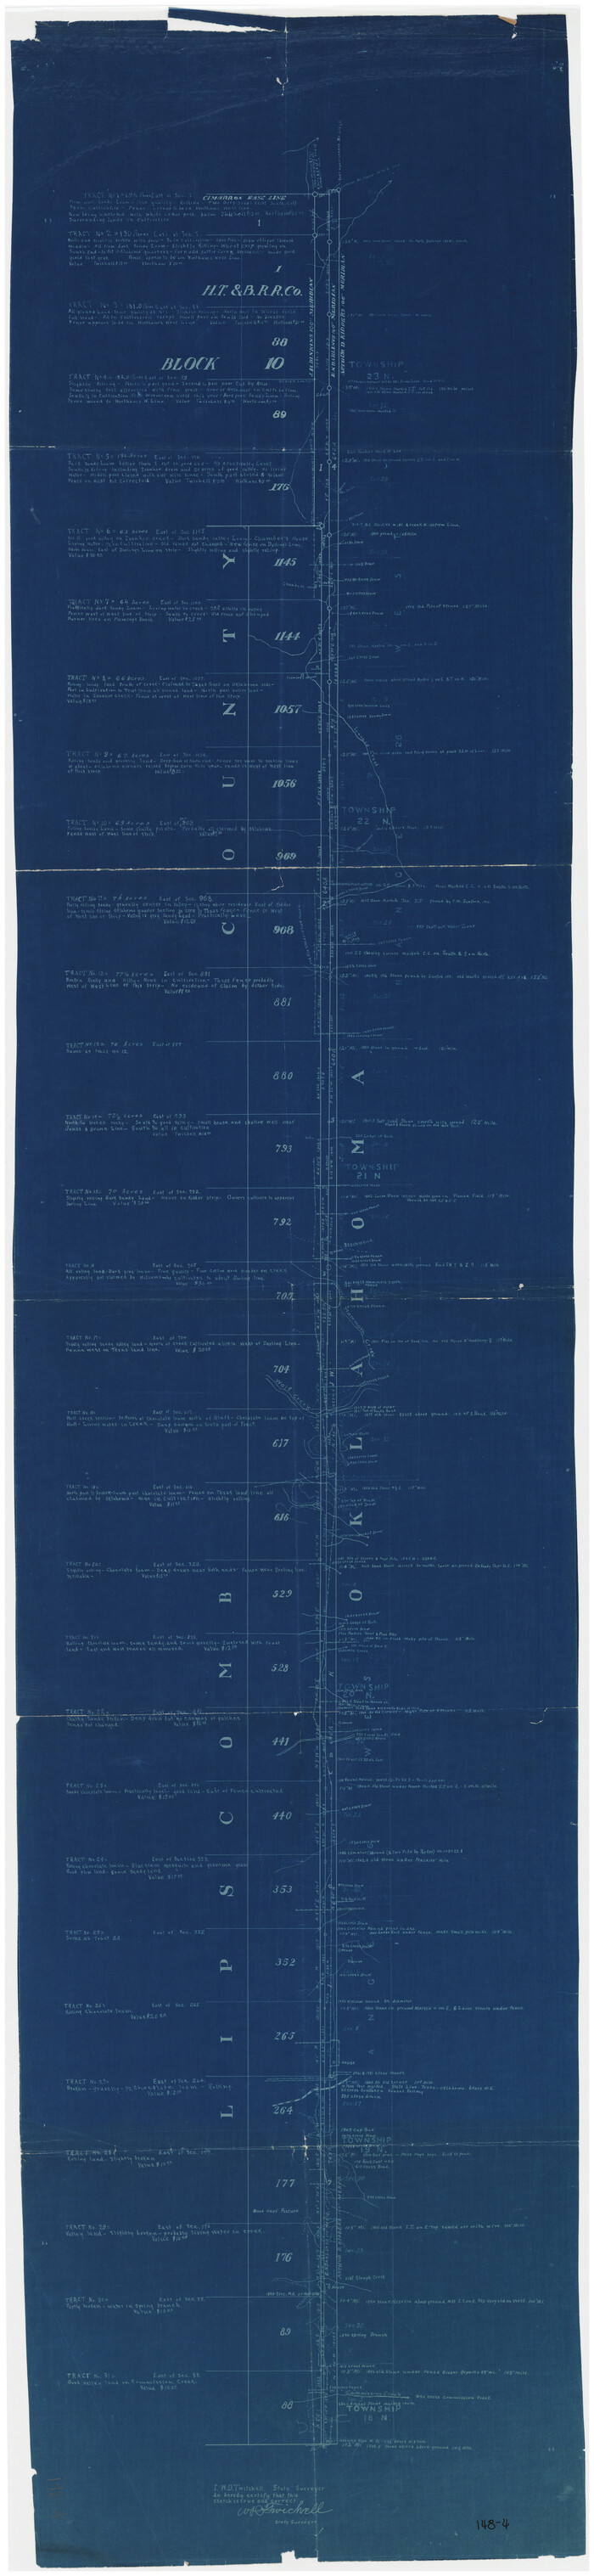 89939, [Sketch showing details along East line of Lipscomb County], Twichell Survey Records